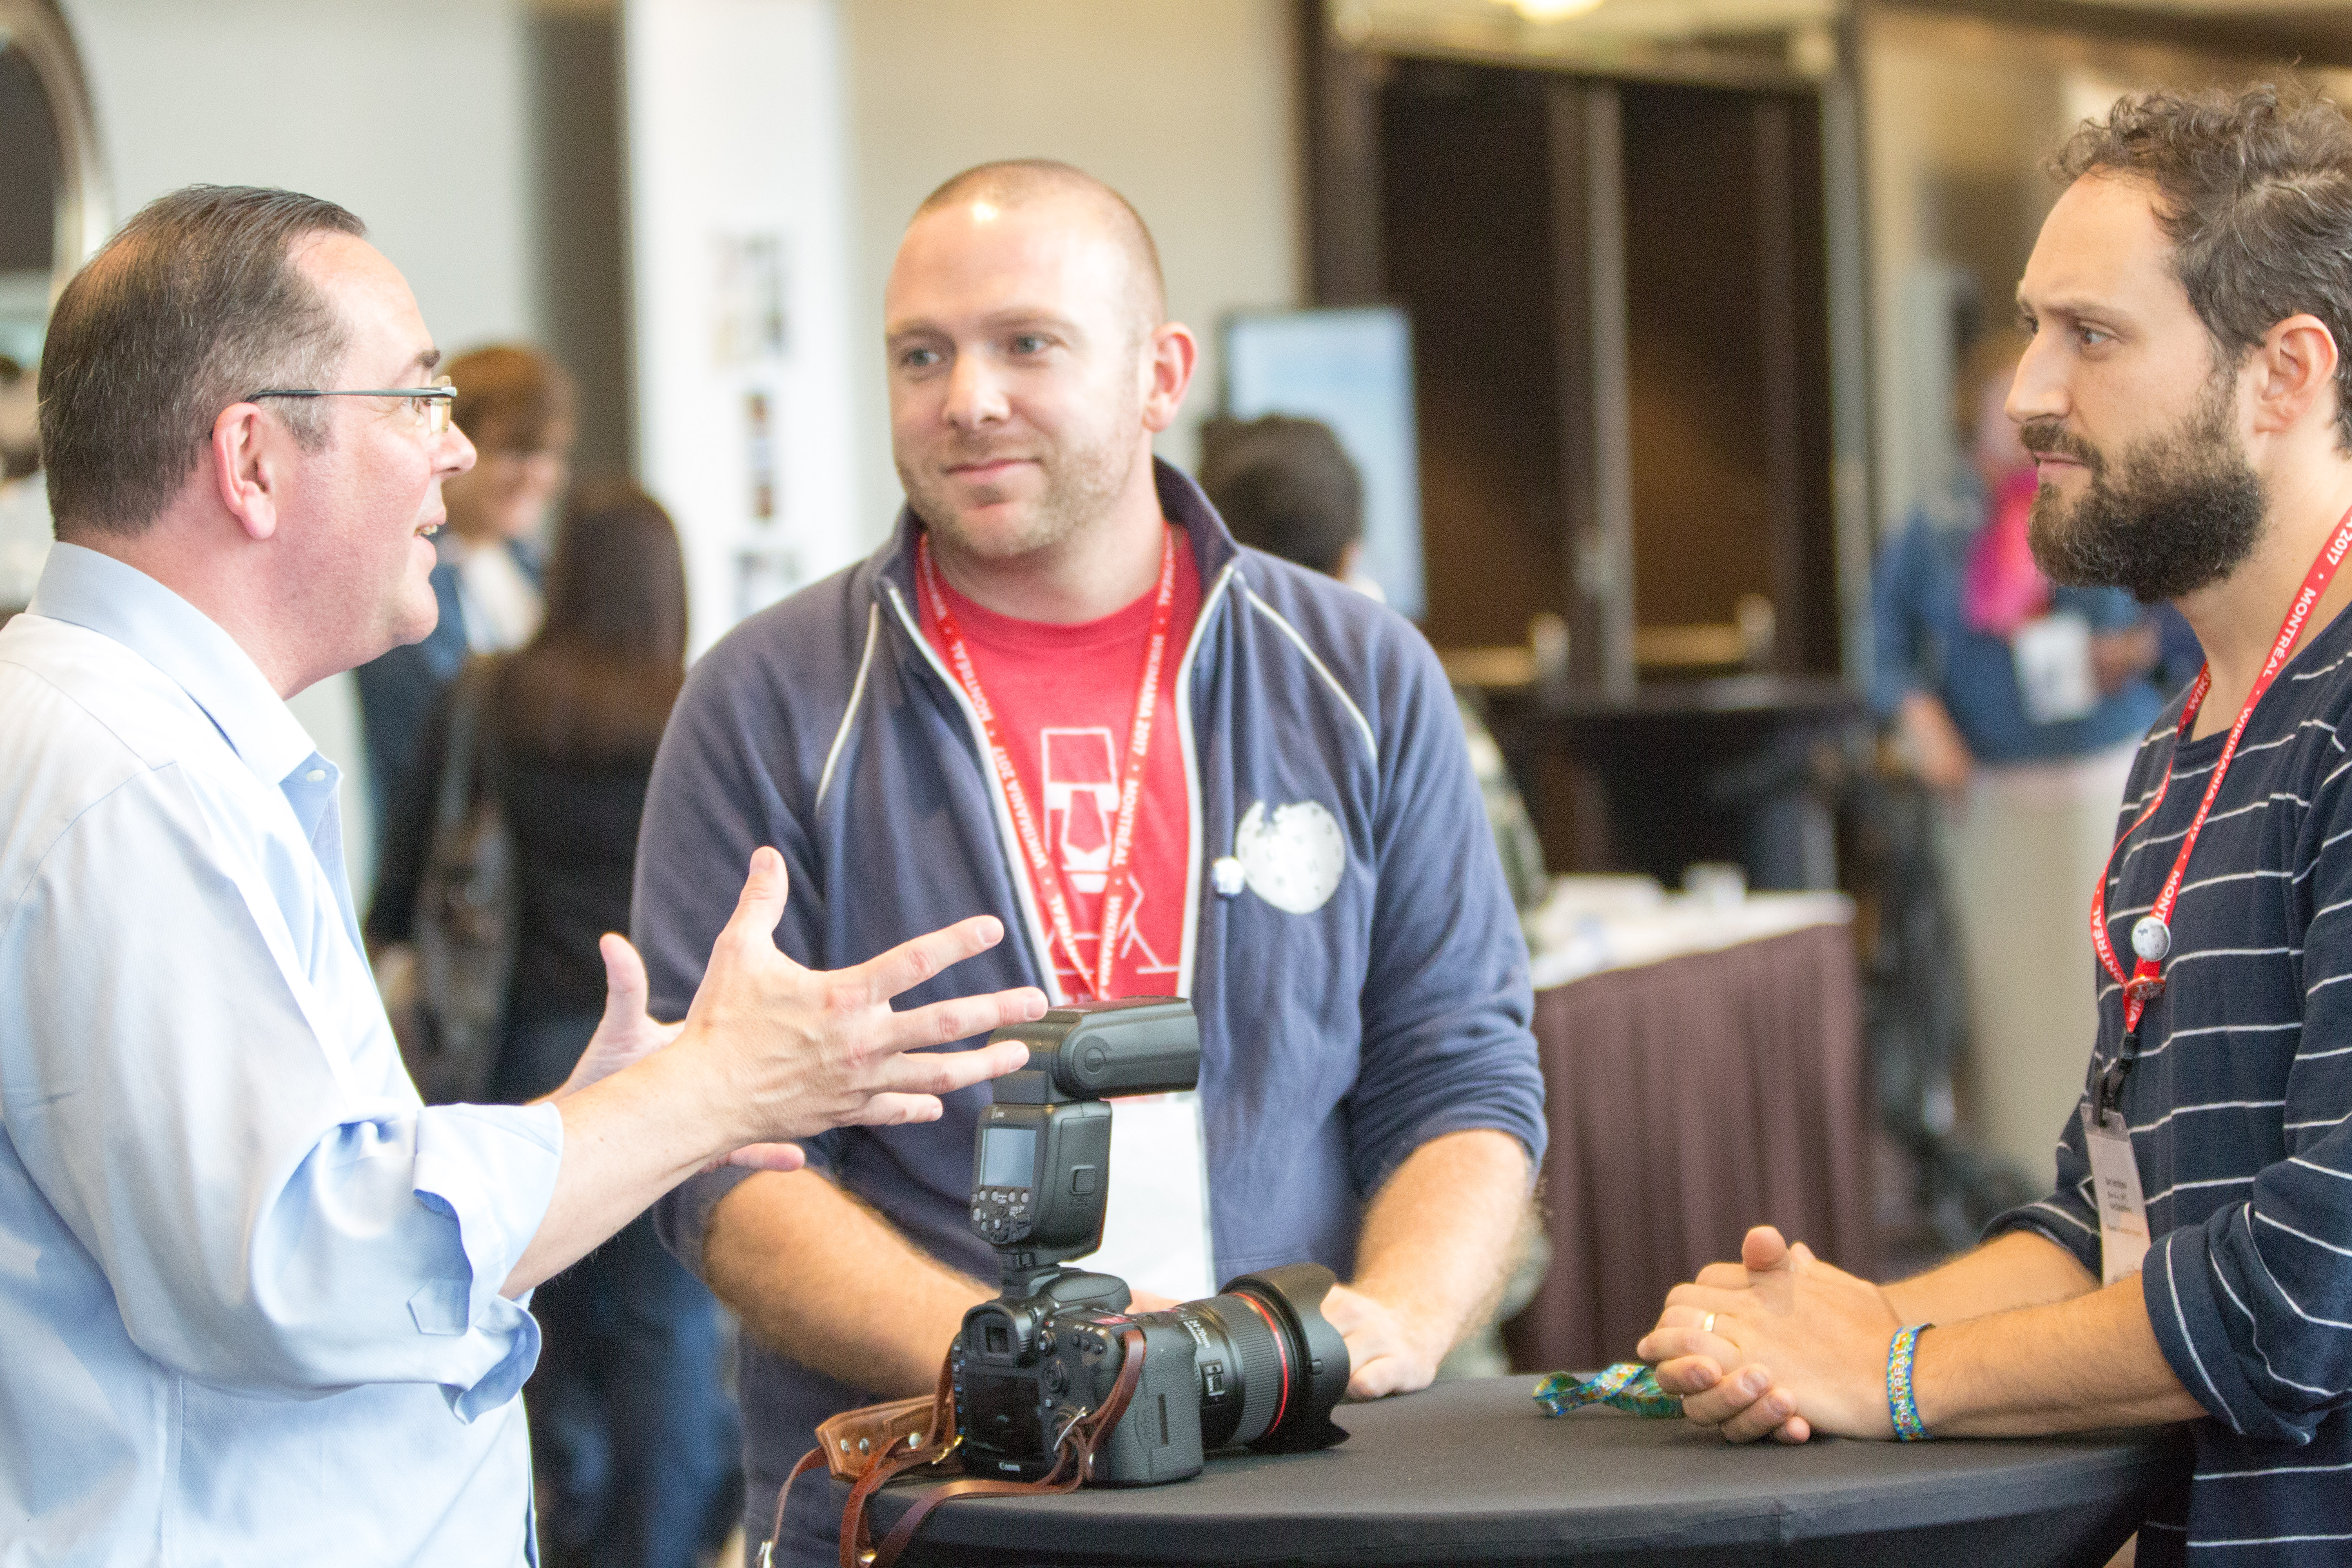 Frank during Wikimania, talking to Tighe Flanagan, Wikimedia's Senior Education Program Manager (middle), and Ben Vershbow, Wikimedia's new Lead Programs Manager (right)